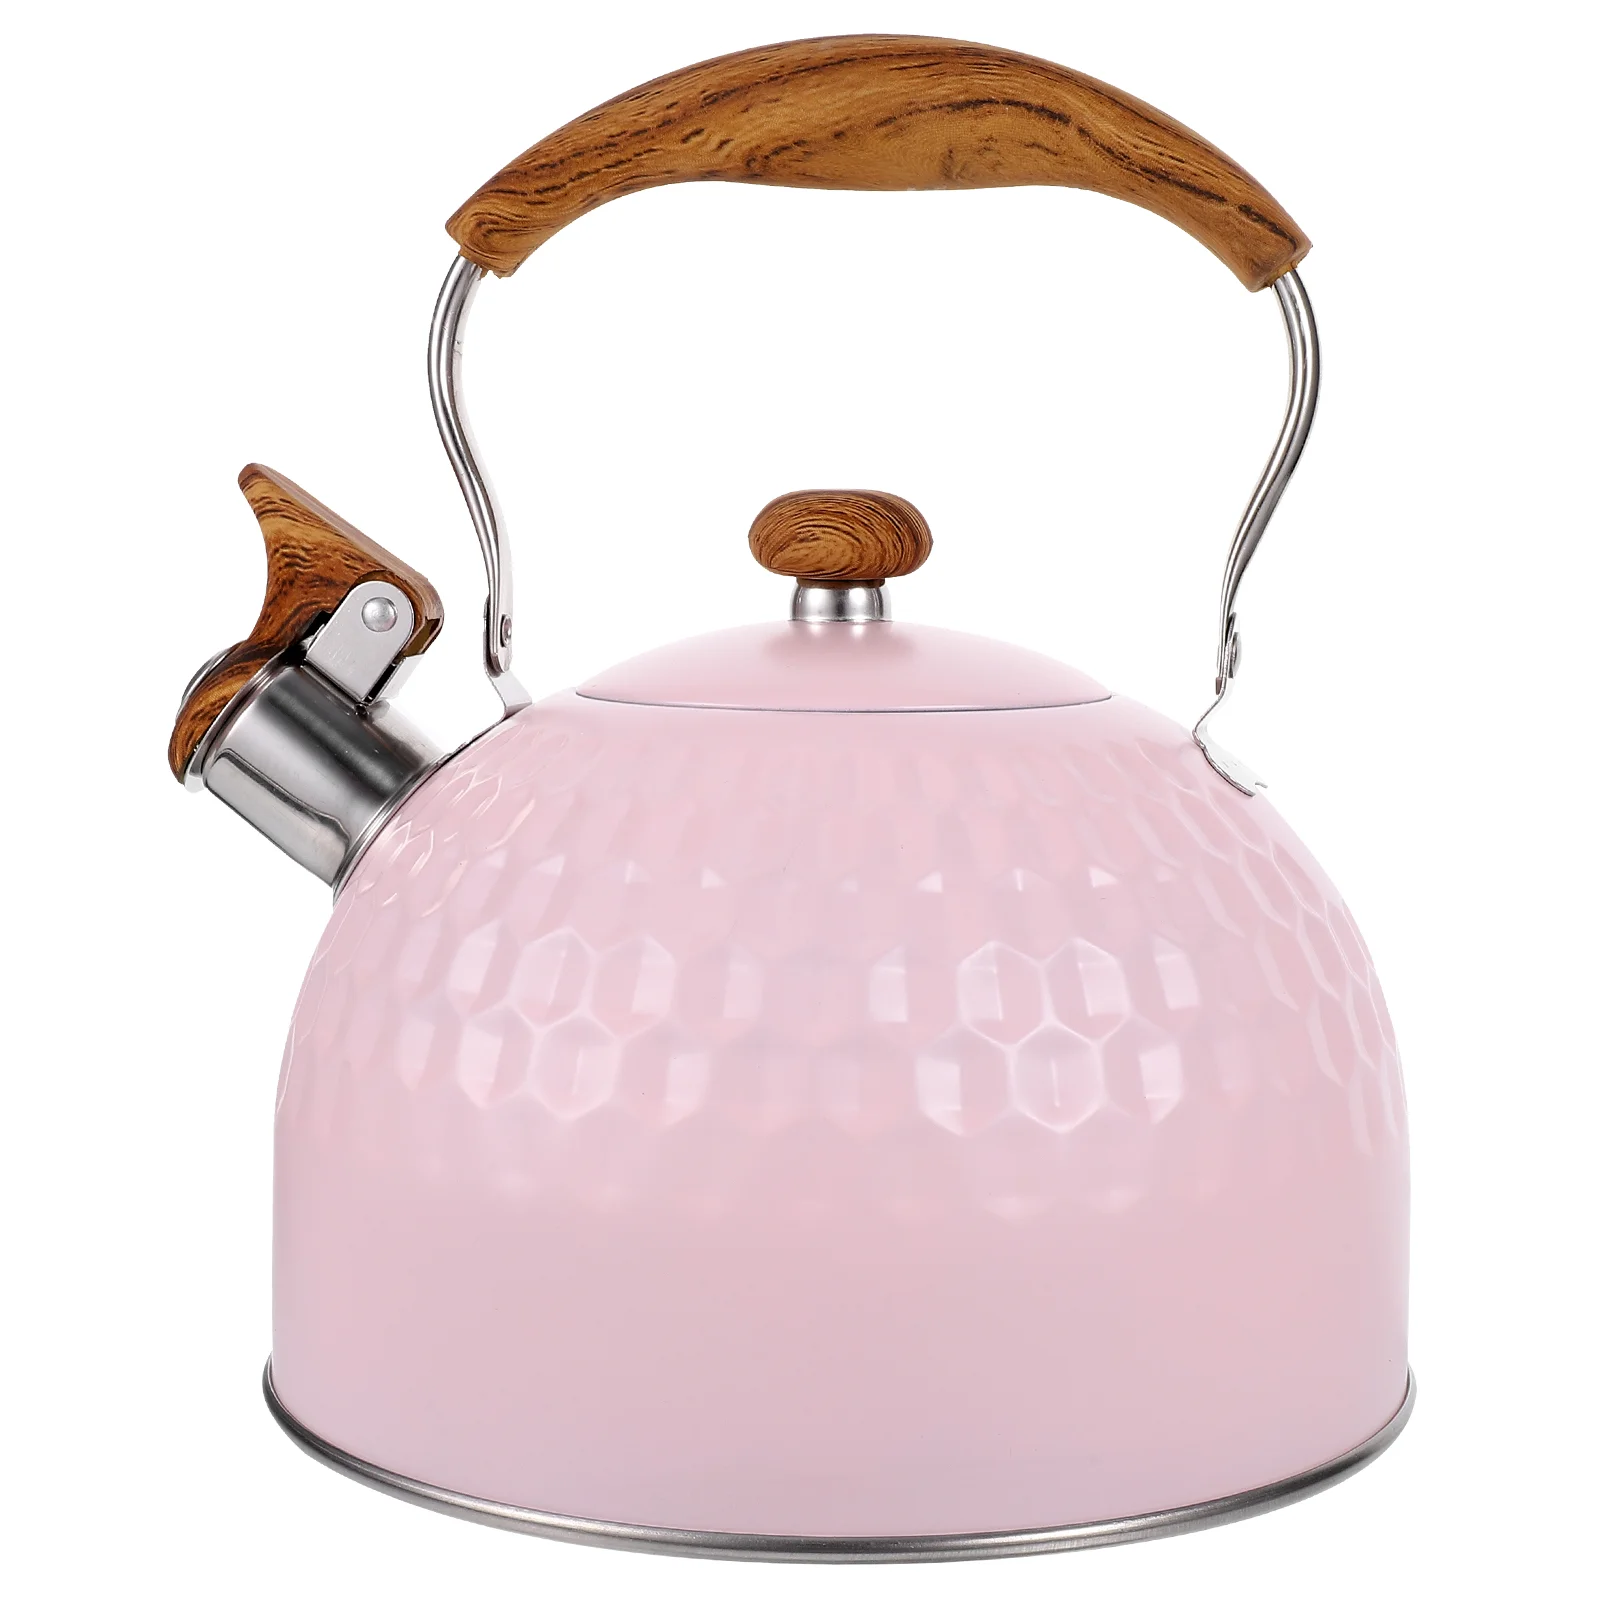 

Stainless Steel Tea Kettle Boiled Pot for Restaurant Metal Cute Tea Heating Convenient Stove Tea Kettles Gas Hob You Can